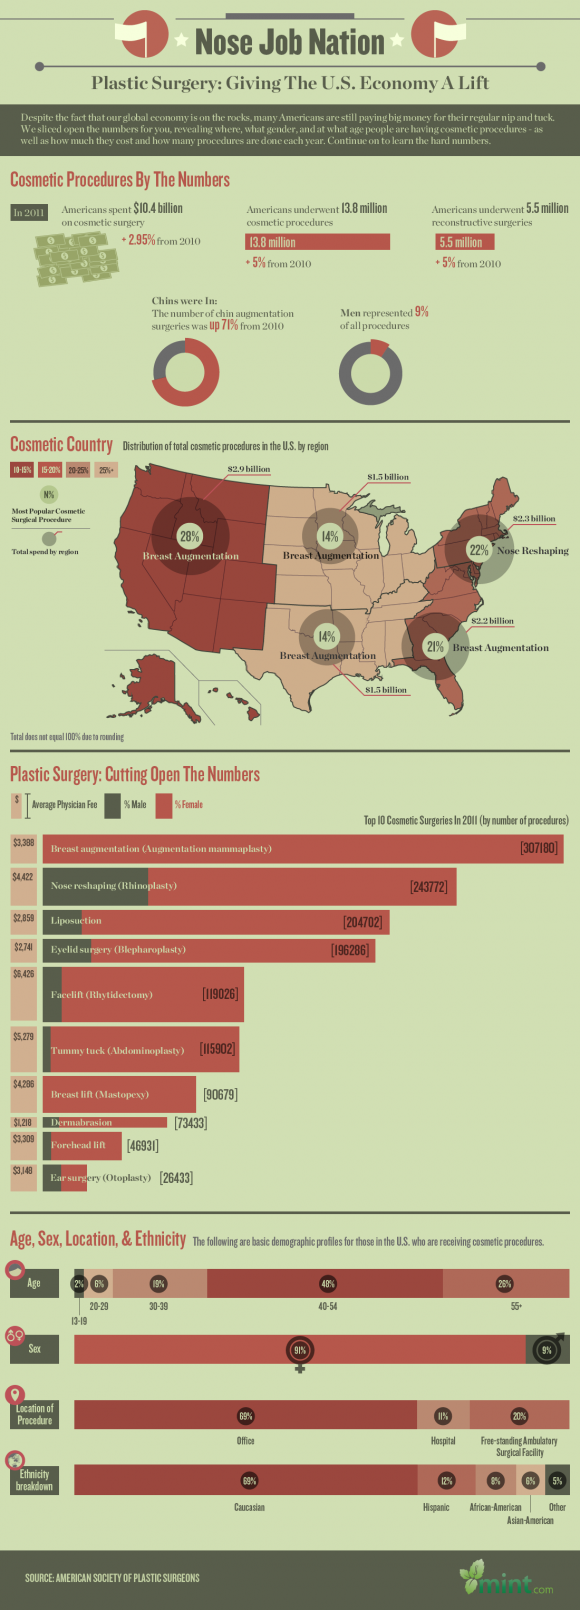 Plastic Surgery in the U.S